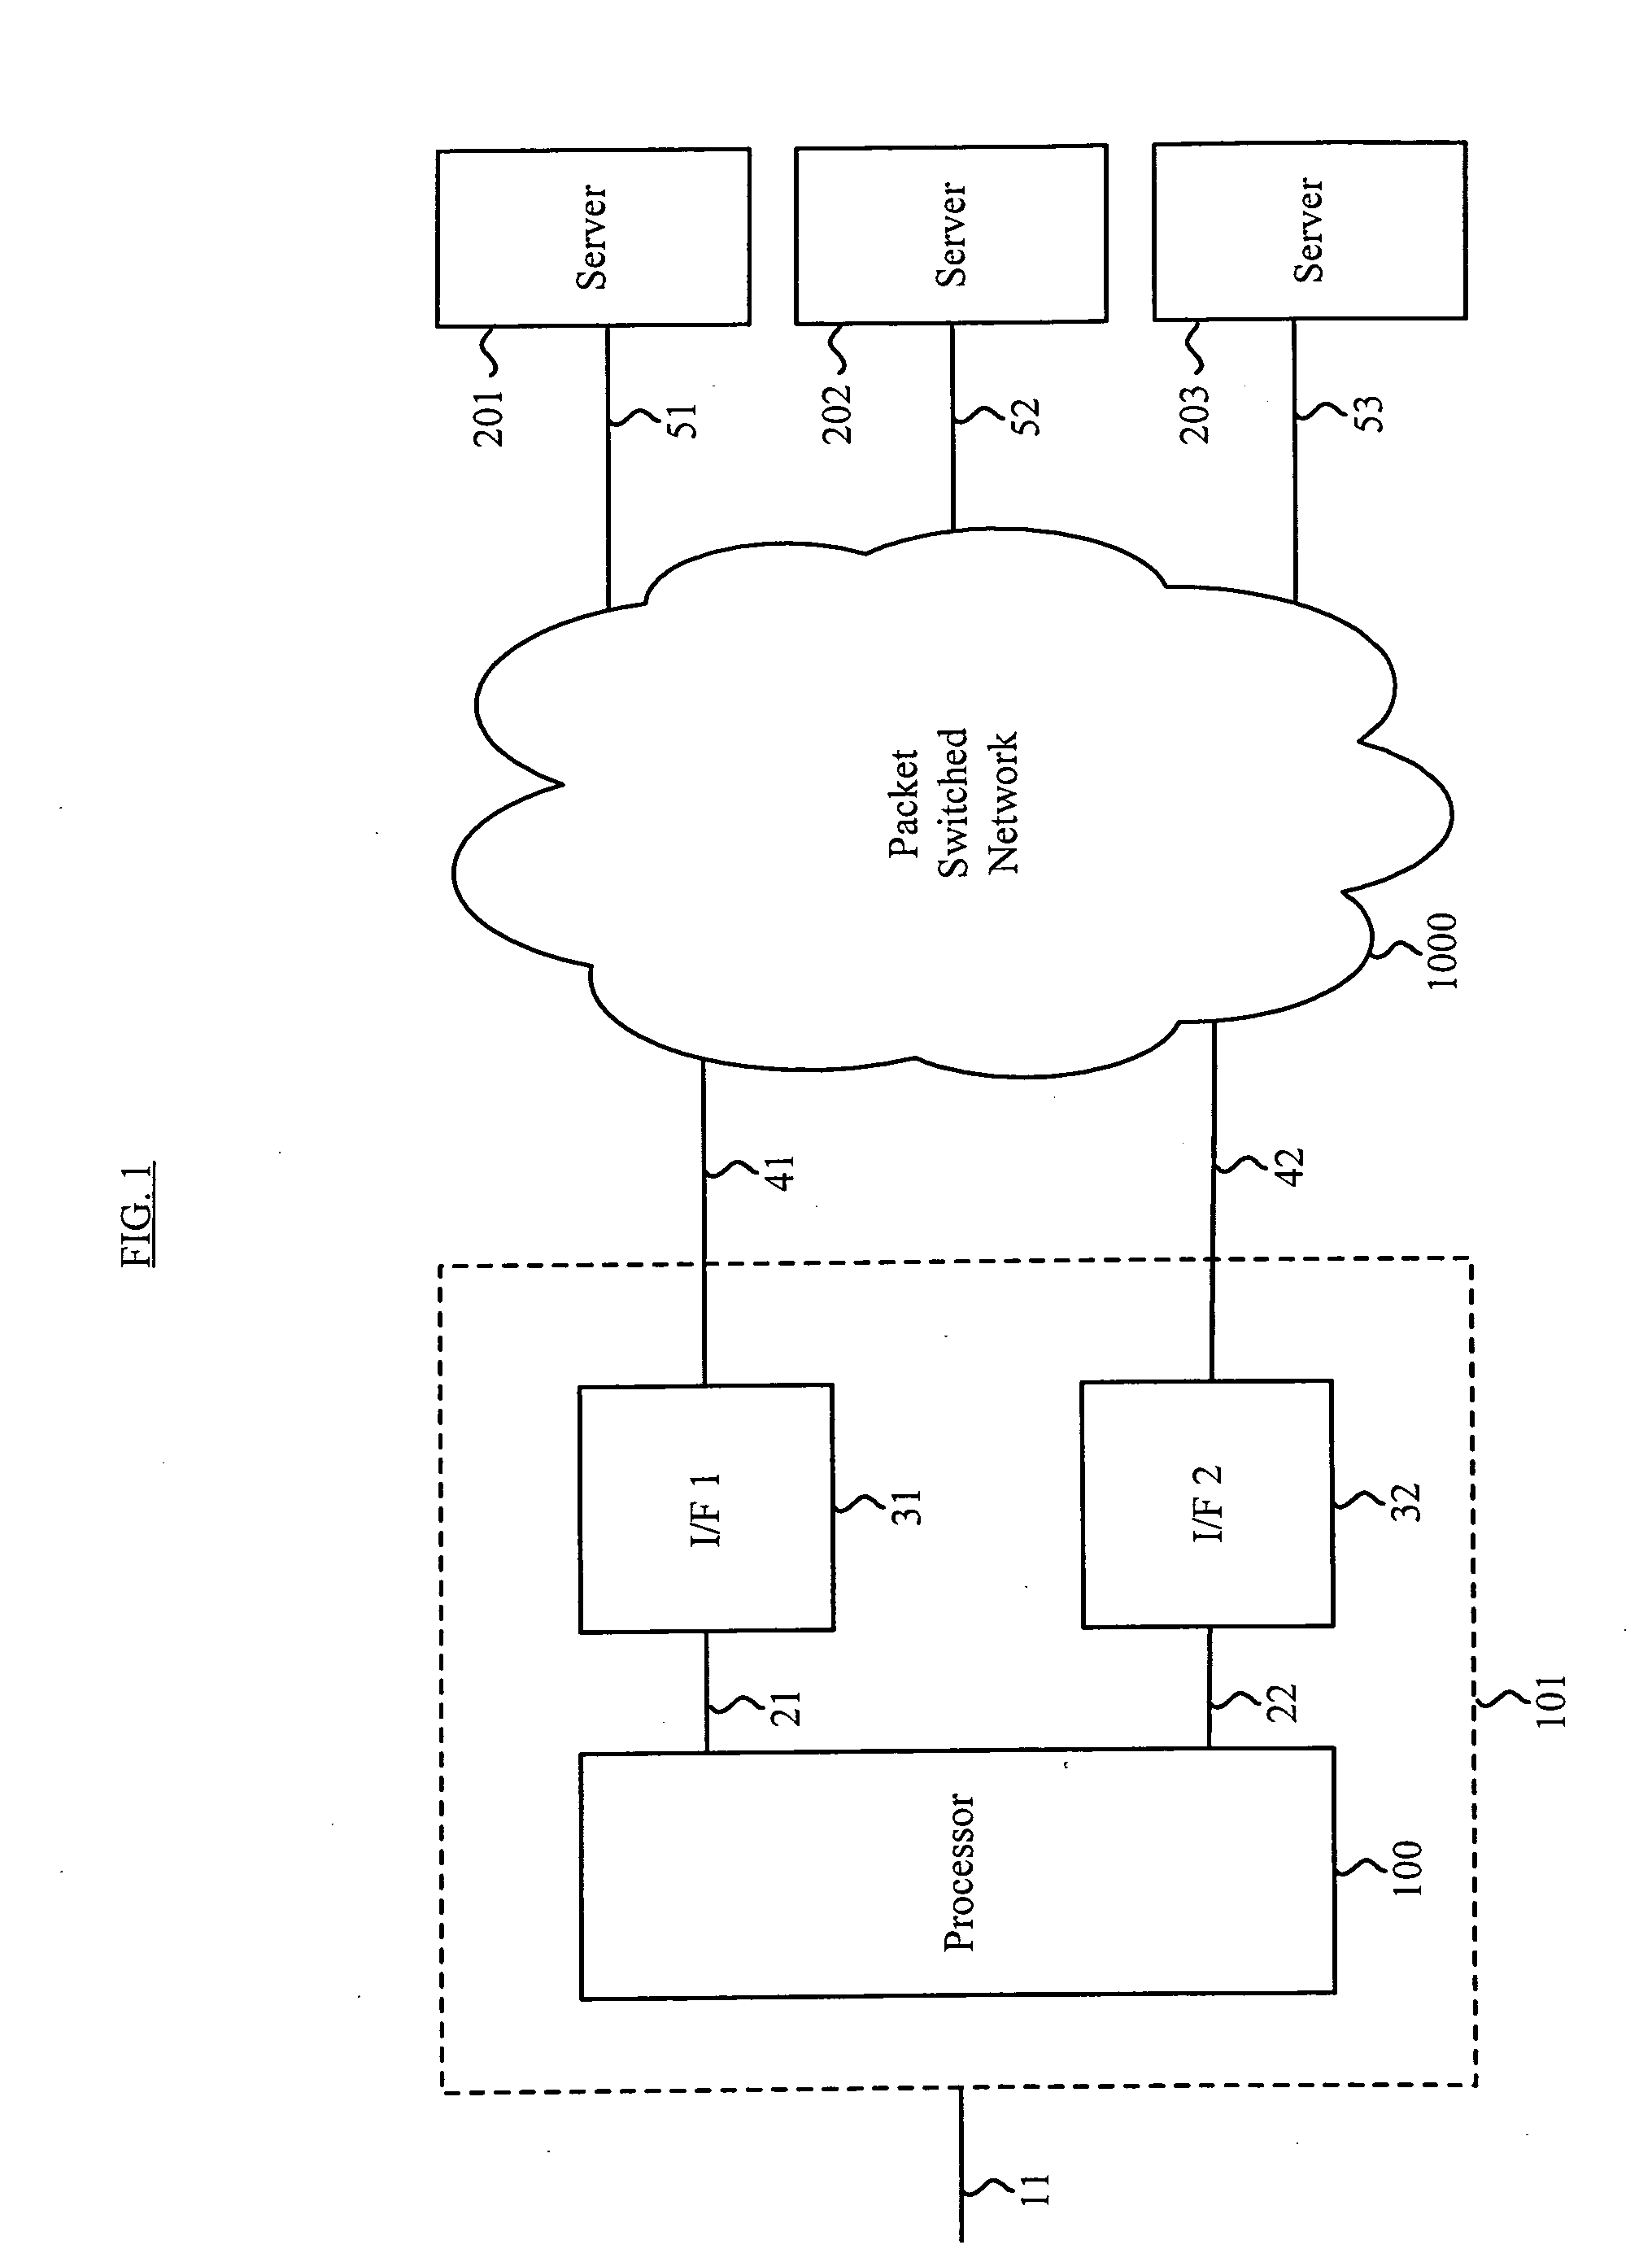 Access line bonding and splitting methods and apparatus